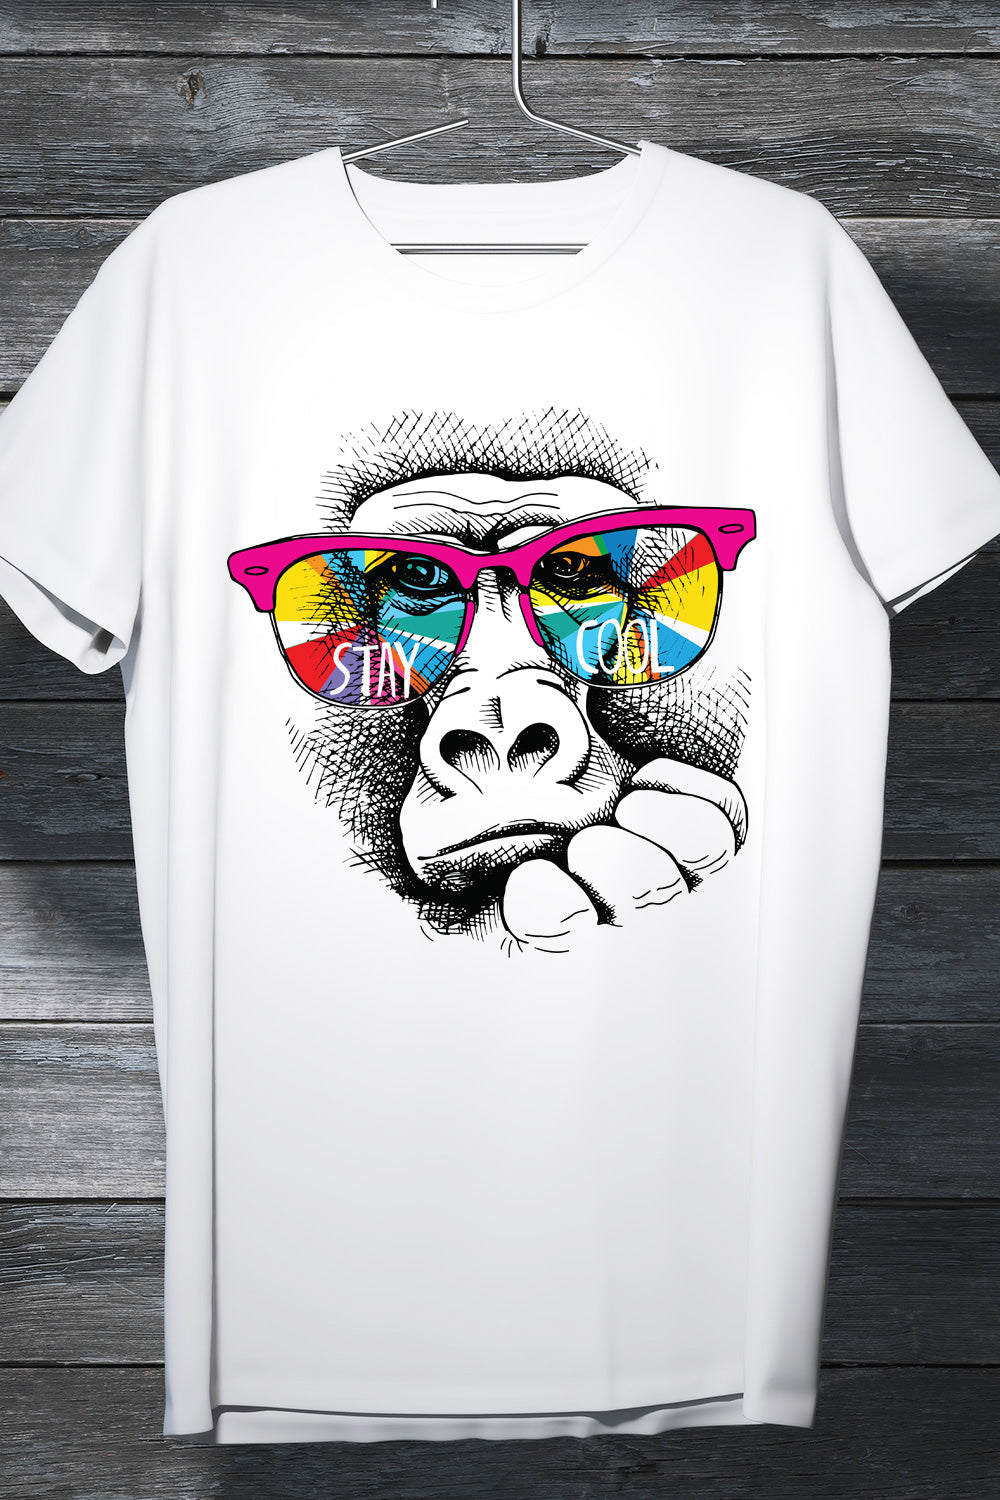 Paytm Exclusive - Stay Cool - Monkey with Goggles Cool printed TShirt